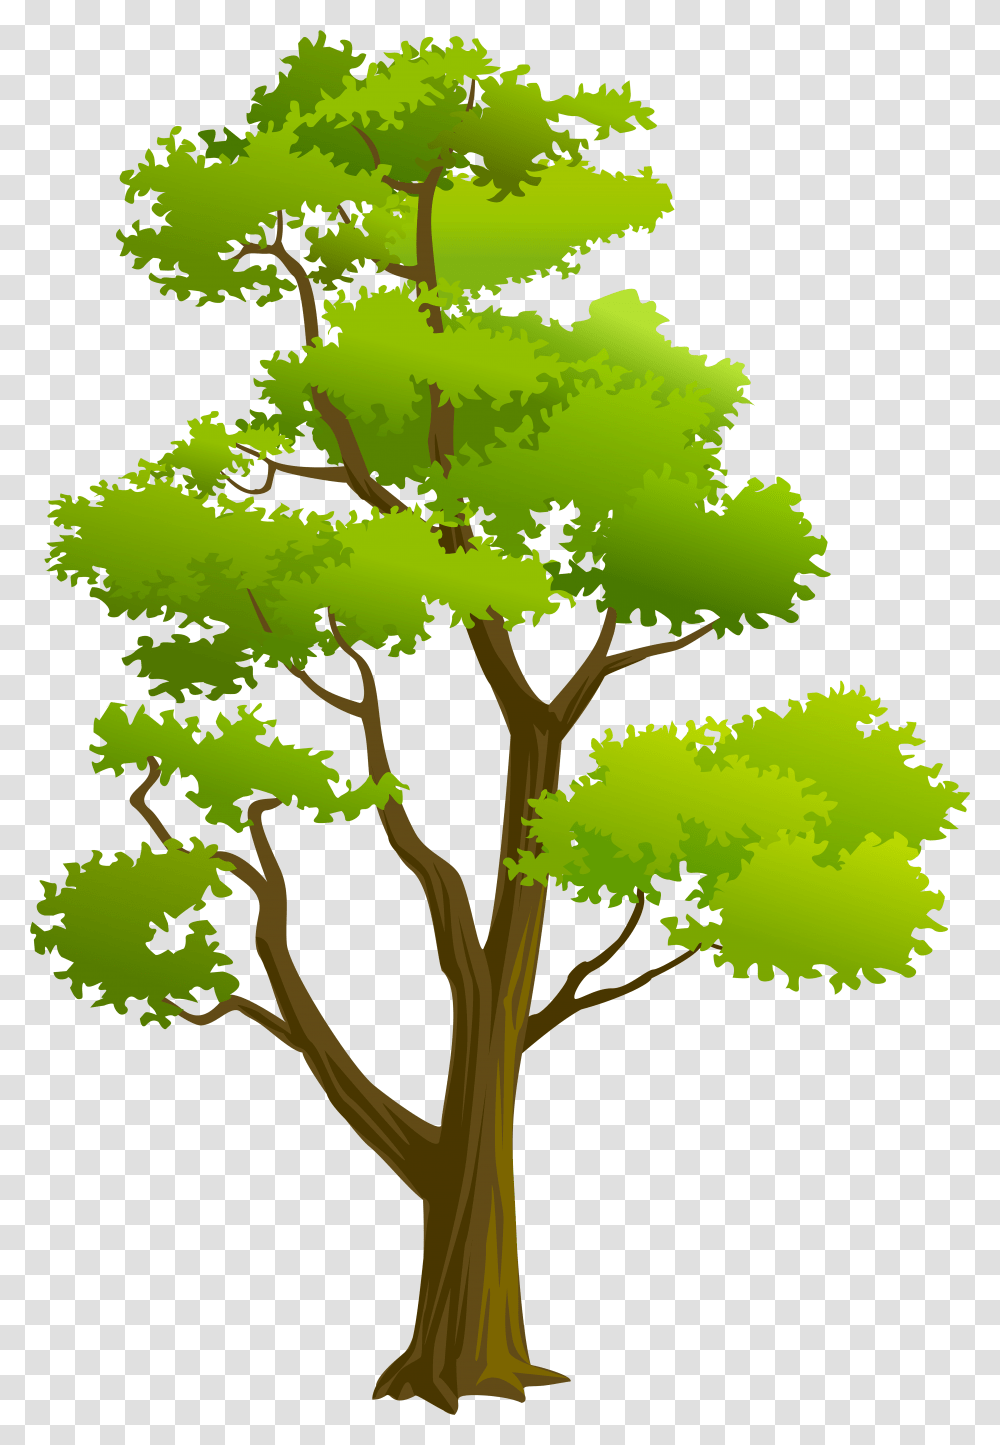 Free Tree Images Background Tree Clipart High Resolution, Plant, Leaf, Tree Trunk, Oak Transparent Png